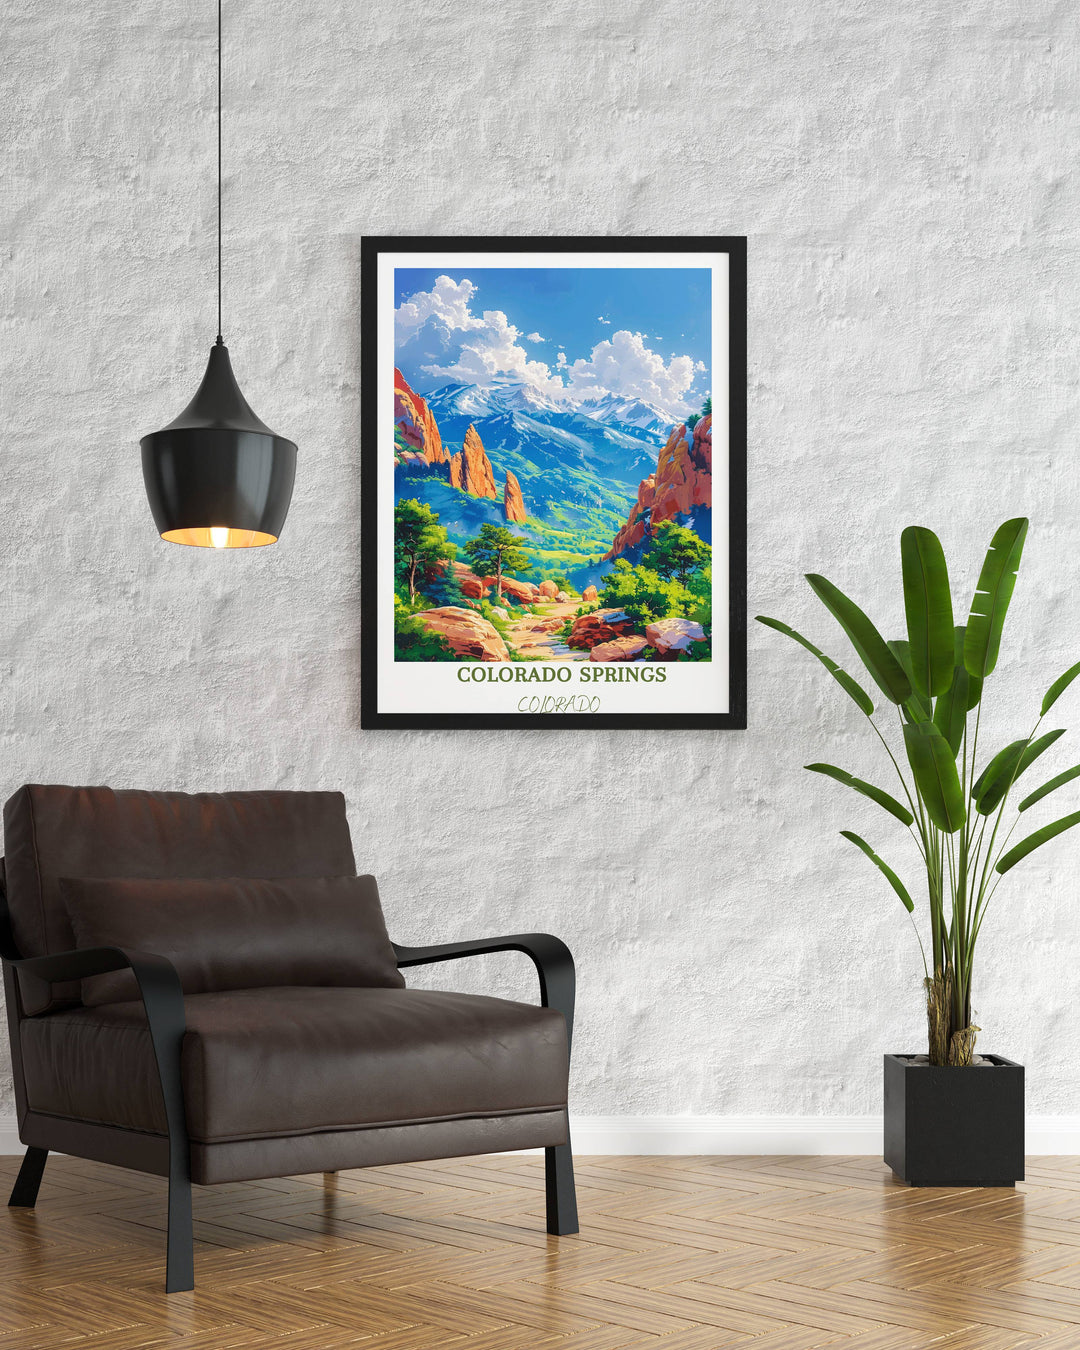 Enchanting Garden of the Gods travel gift capturing the spirit of the place, a memorable token for travelers and admirers of stunning landscapes.